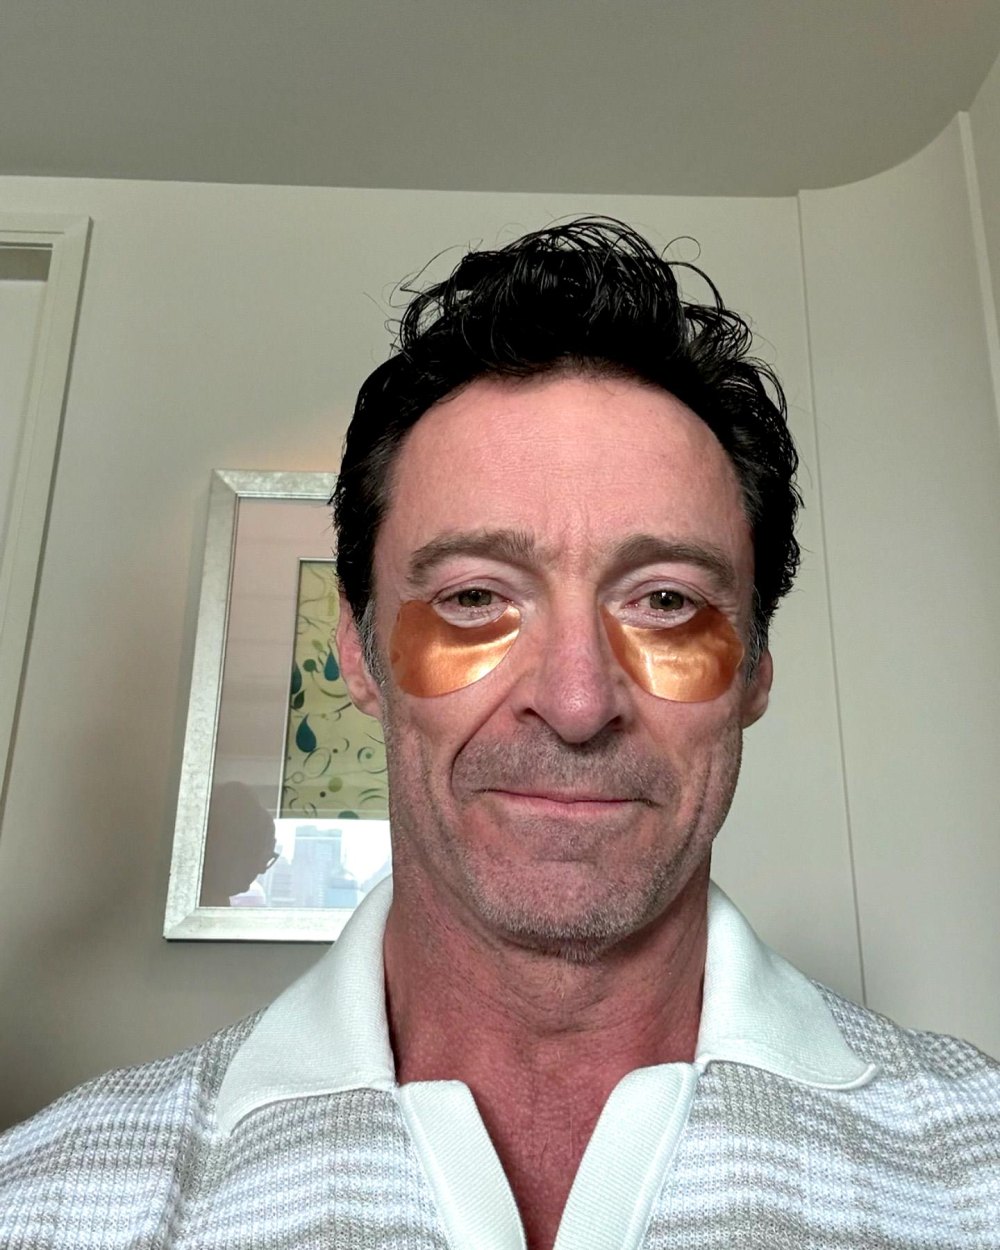 Hugh Jackman Practices Self-Care With Rose Gold Eye Masks- ‘This Is 55’